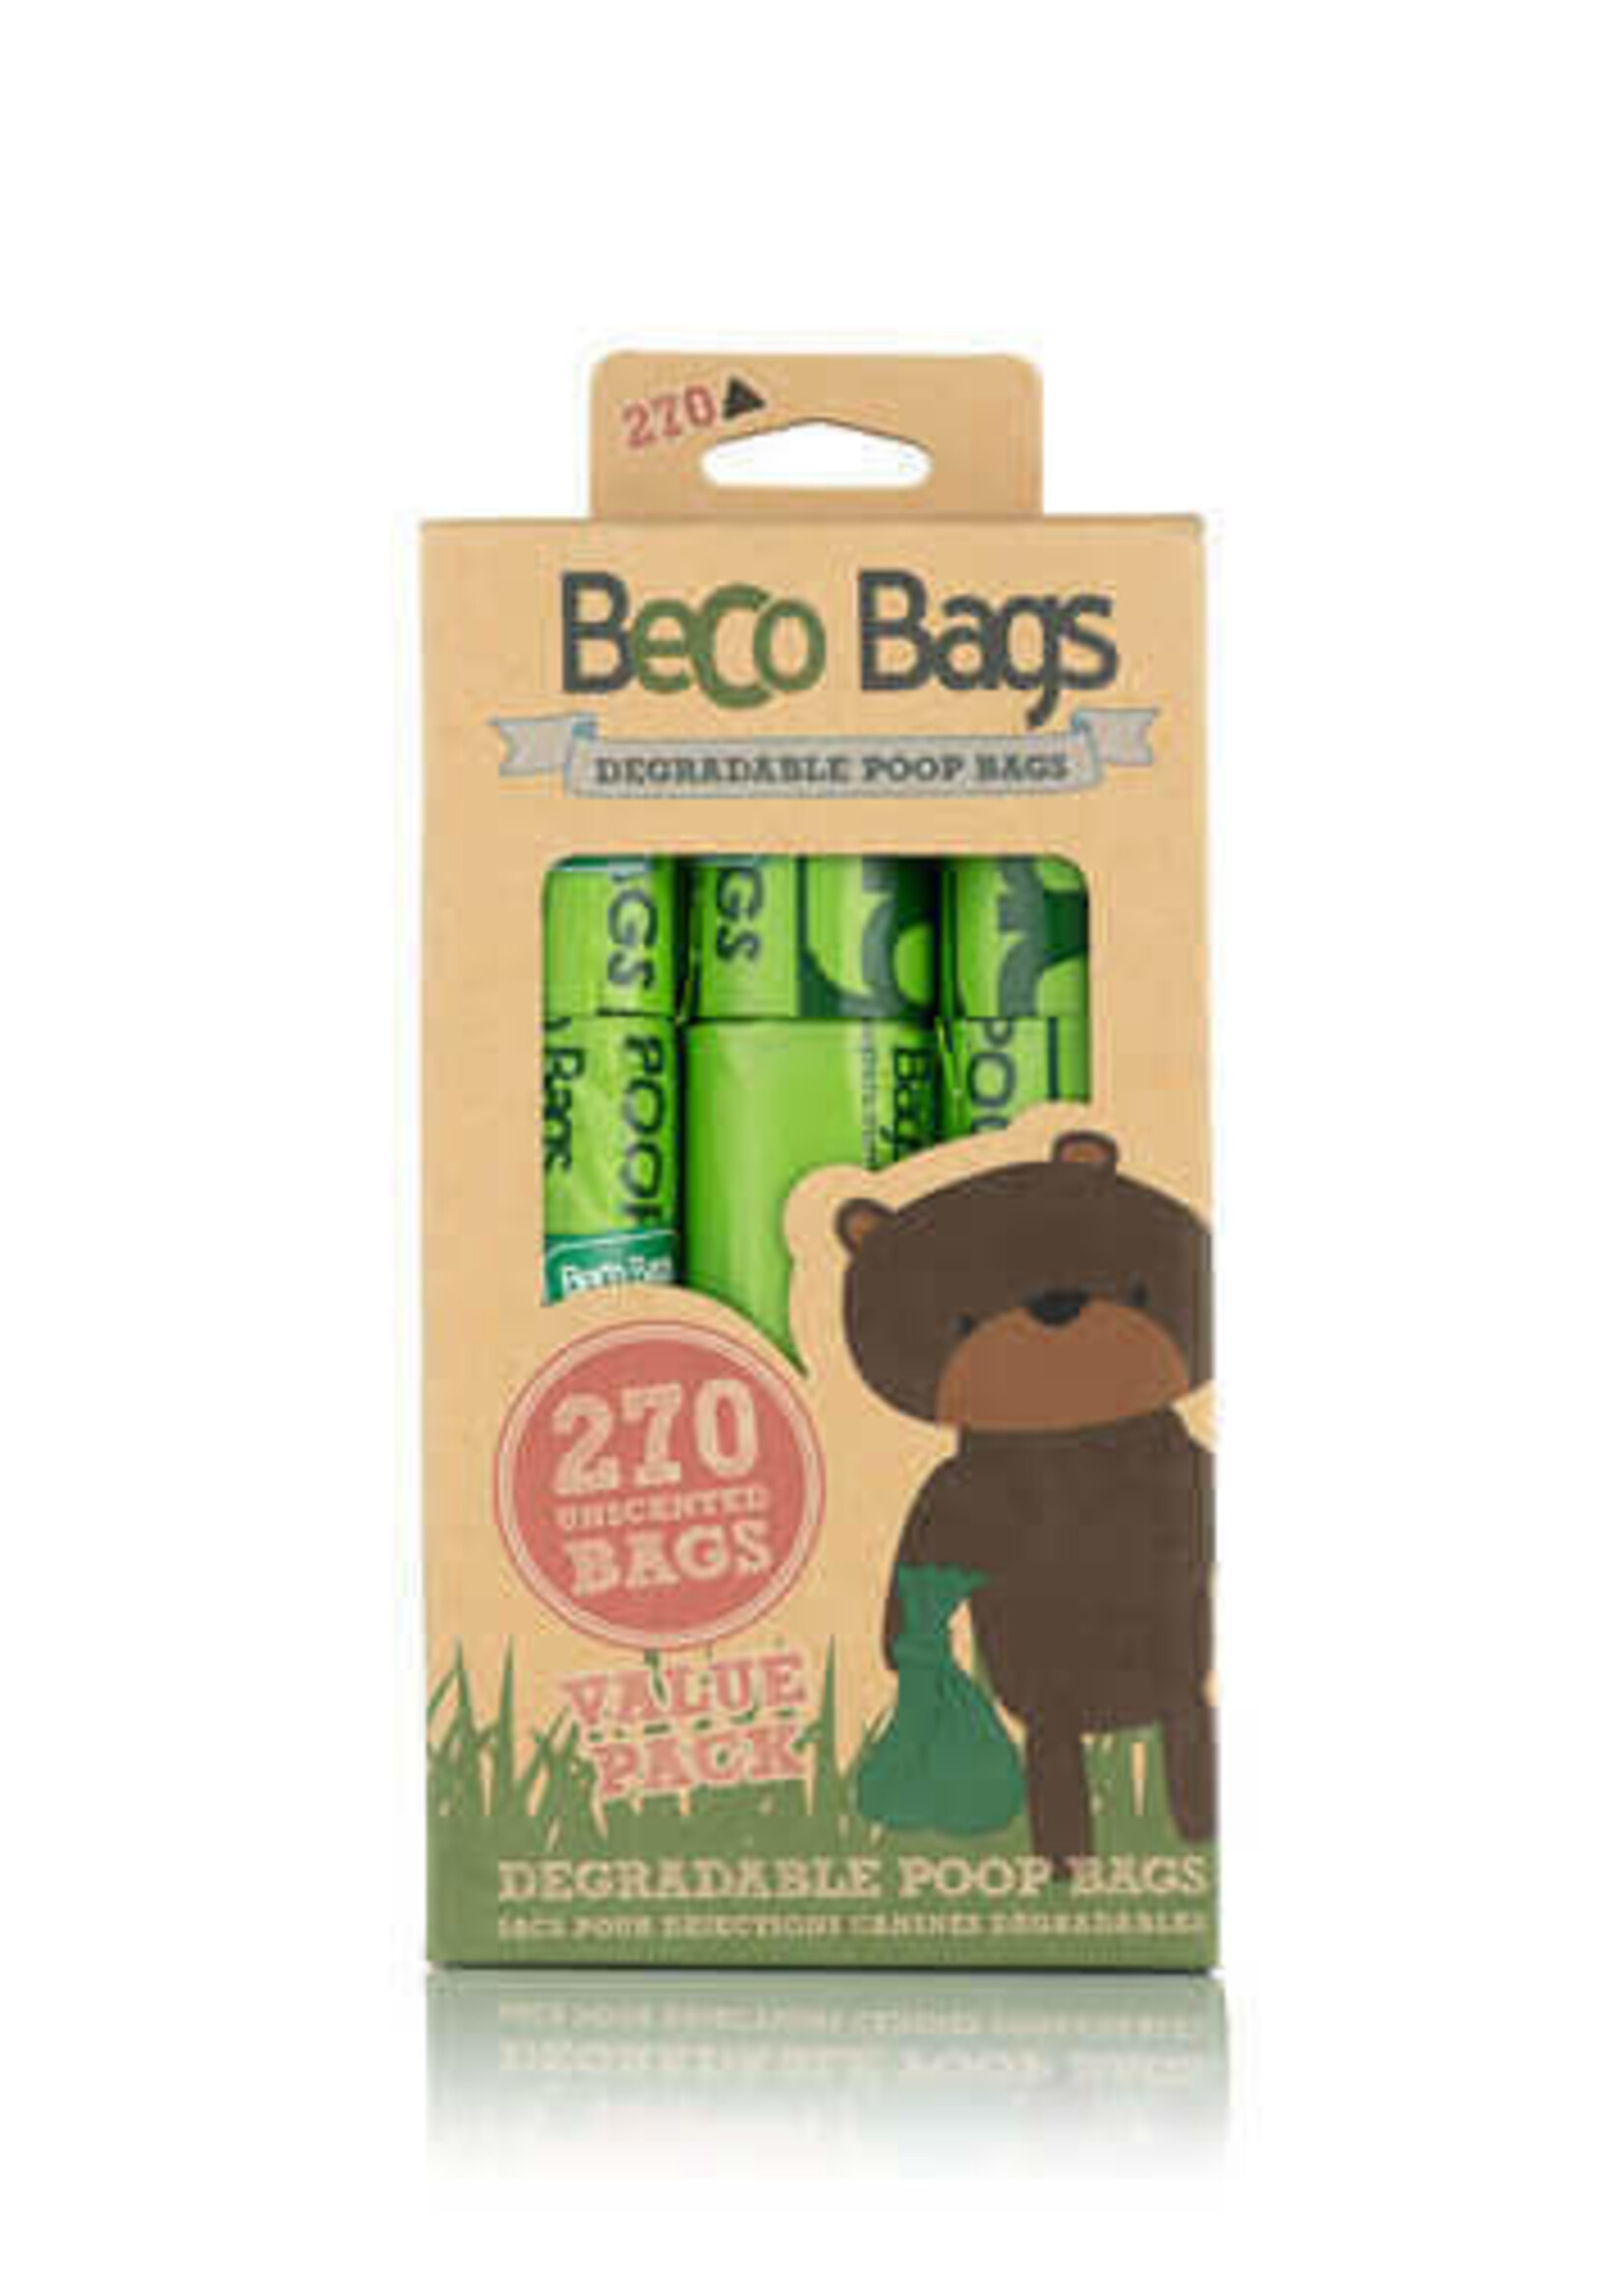 Beco Pets Beco Bags Value Pk (270 bags)